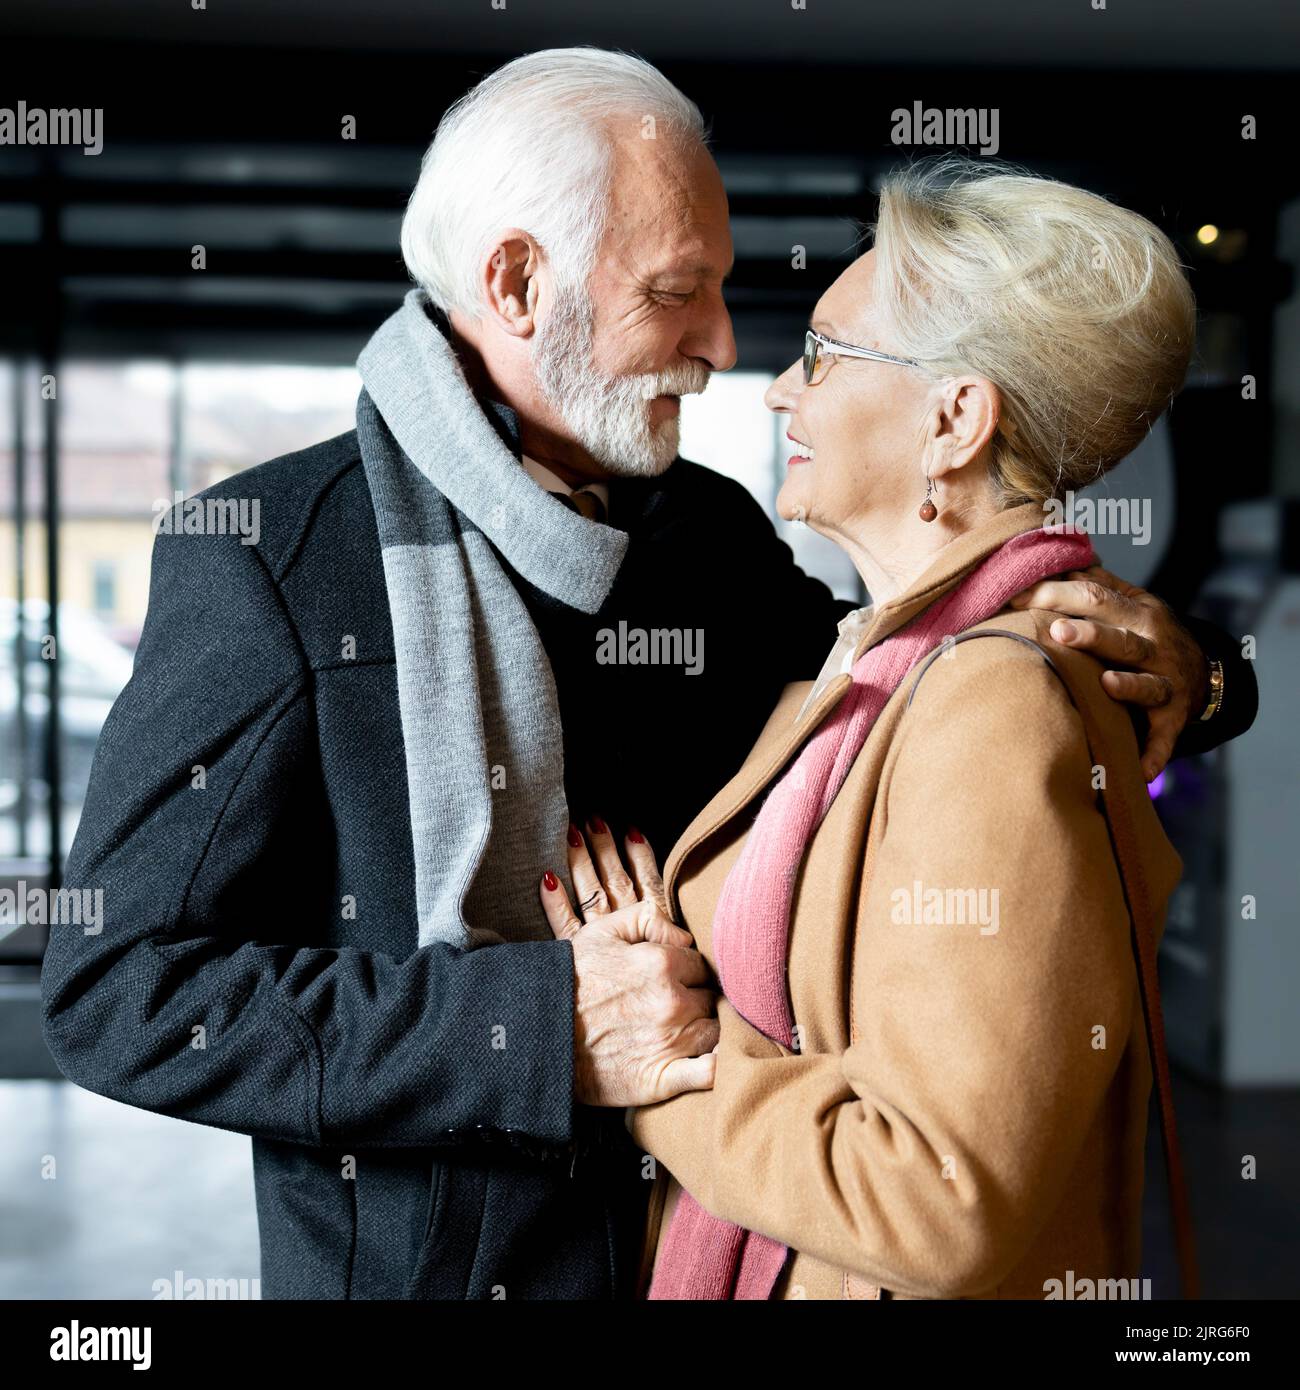 Intimate moment between a husband and wife Stock Photo